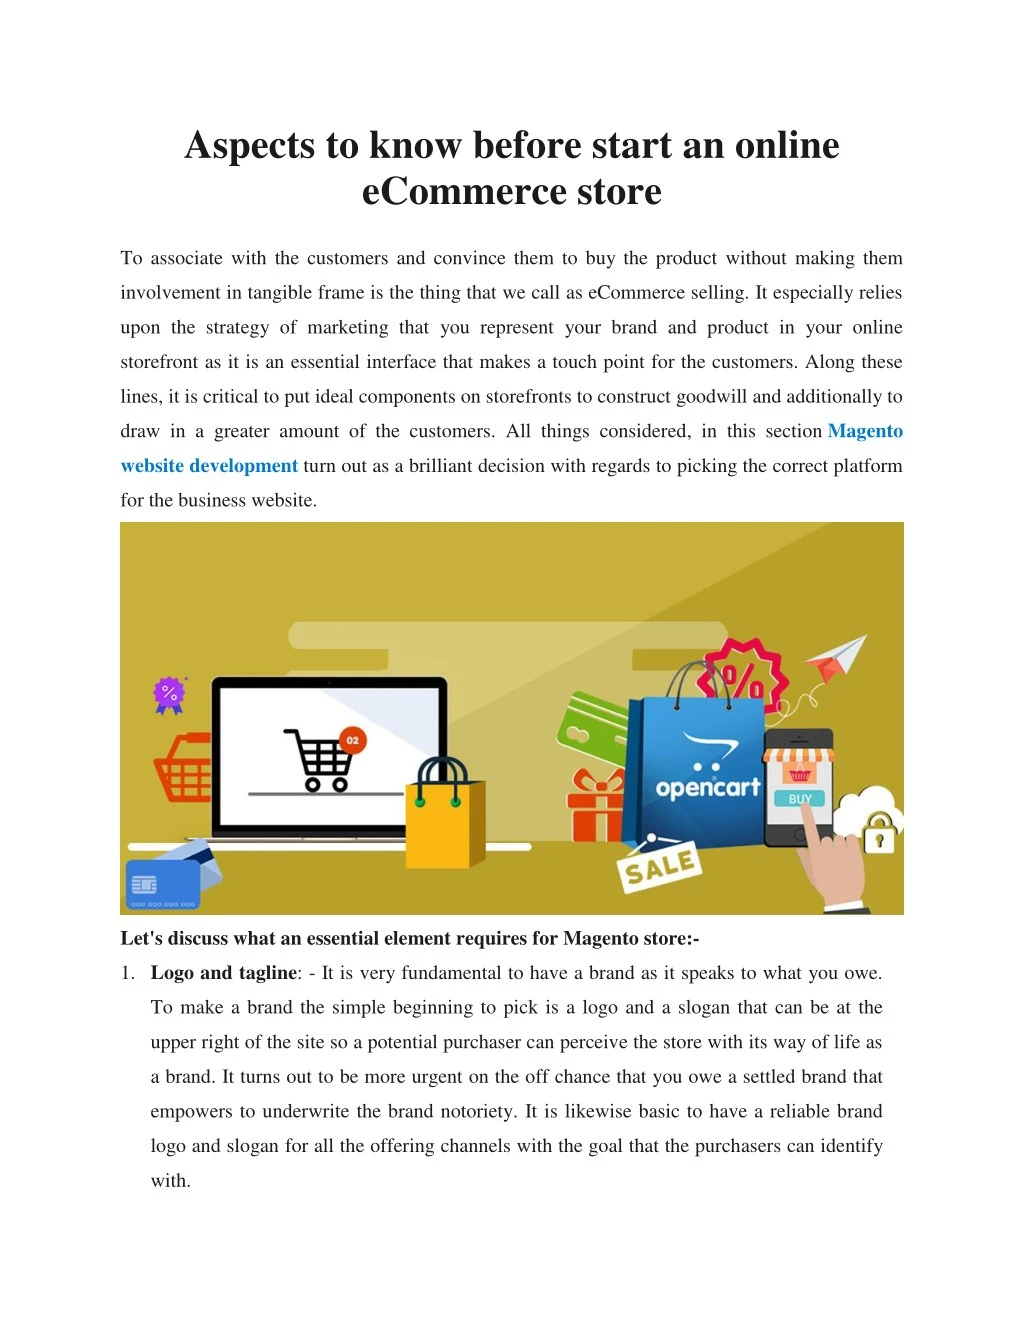 aspects to know before start an online ecommerce